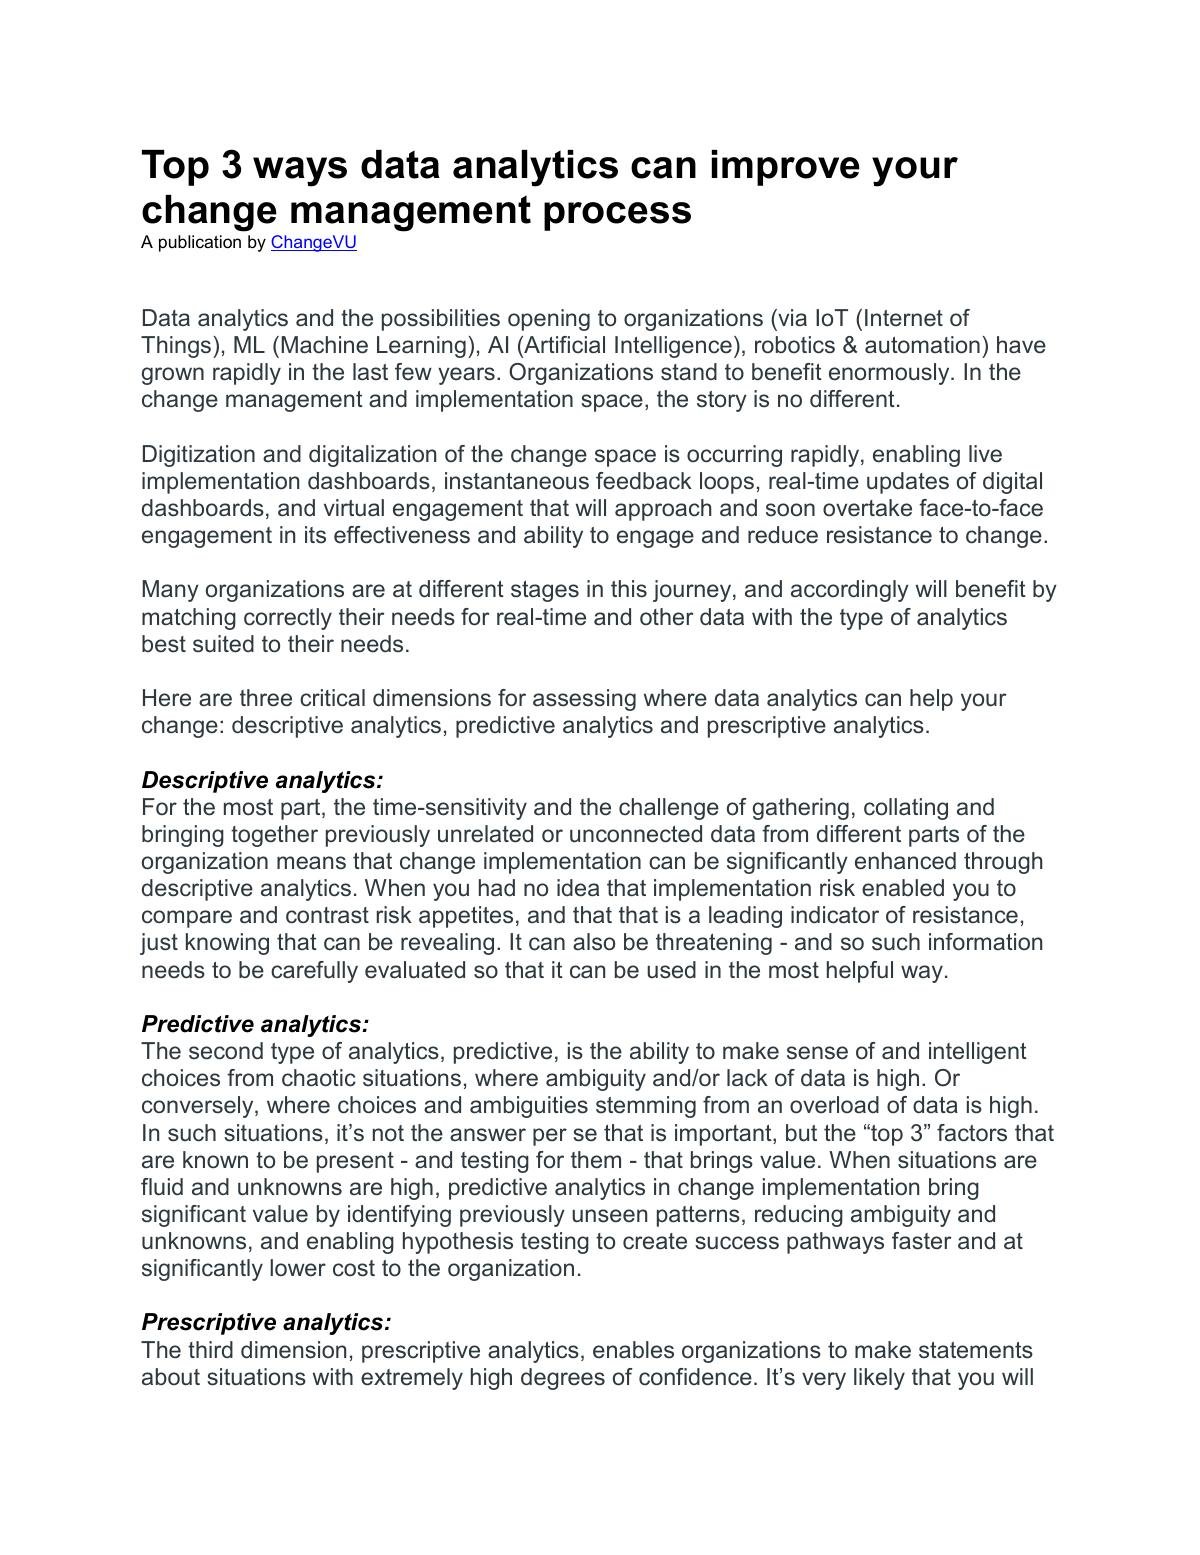 Top 3 ways data analytics can improve your change management process